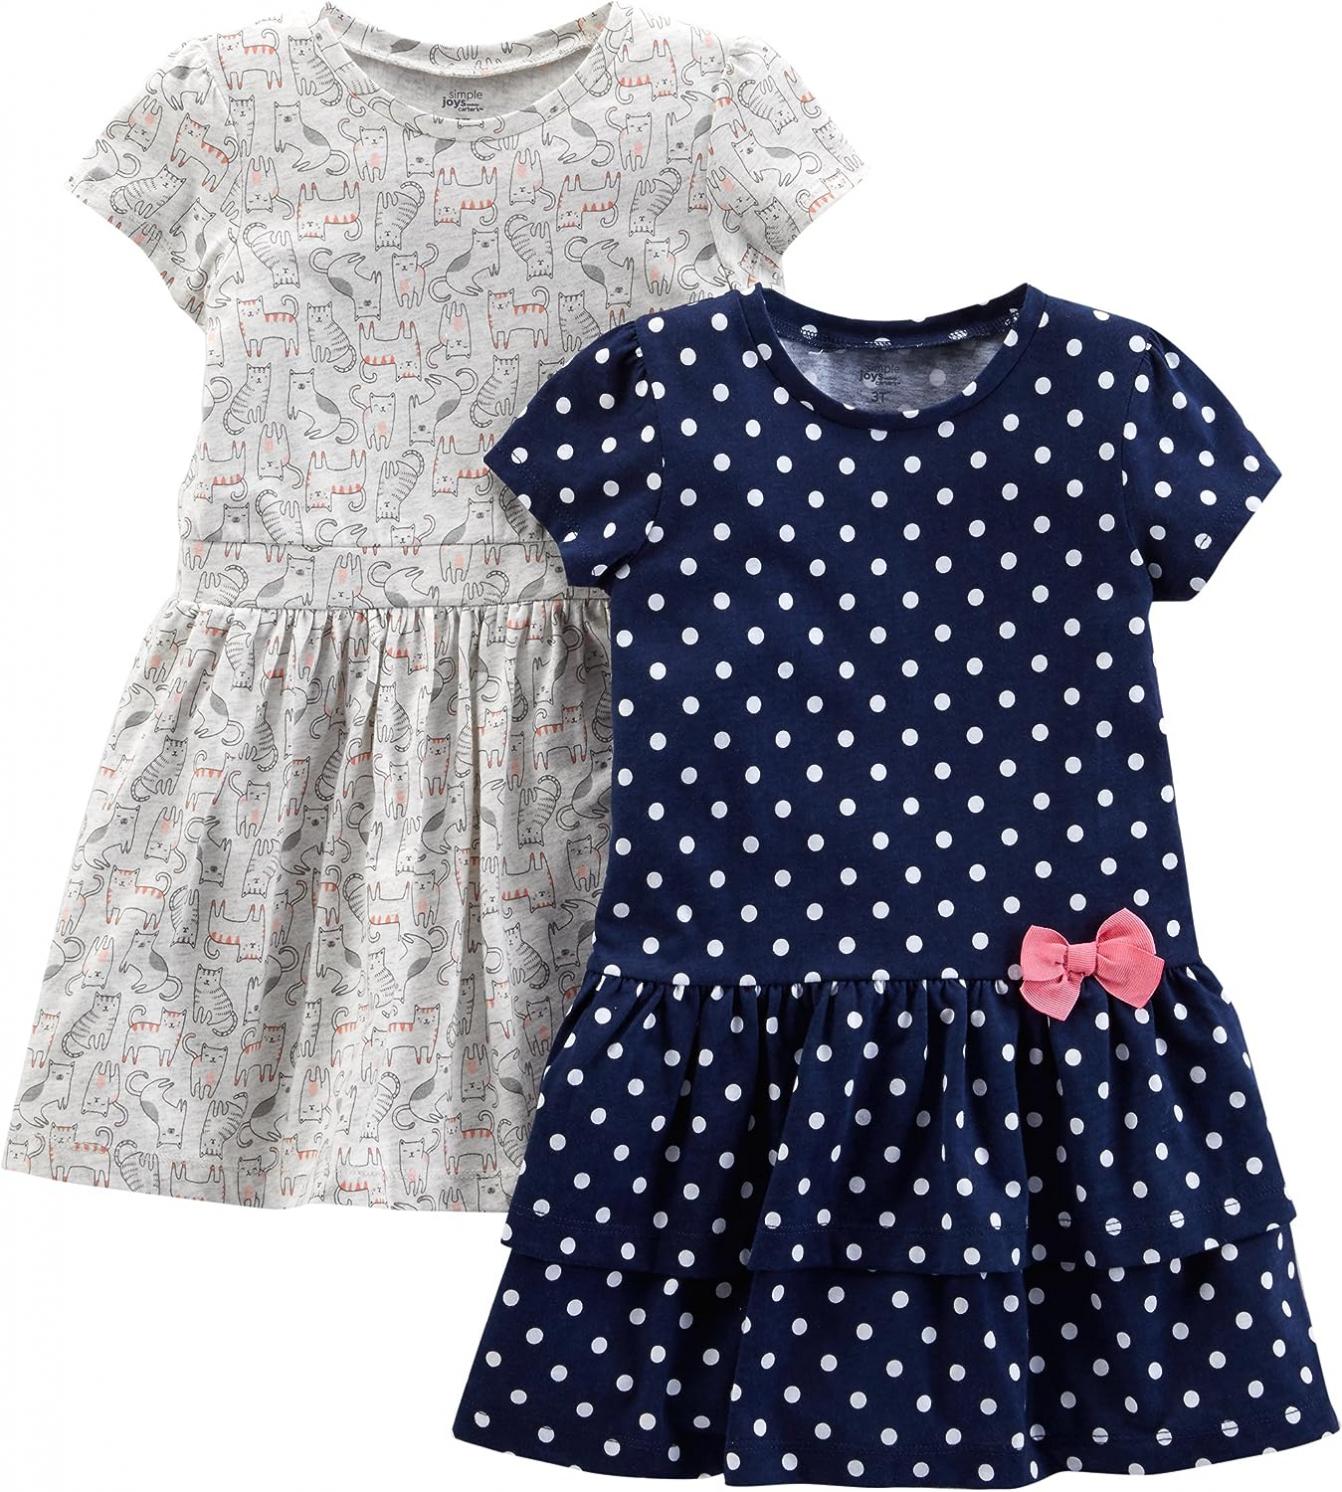 Simple Joys by Carter's Toddlers and Baby Girls' Short-Sleeve and Sleeveless Dress Sets, Pack of 2